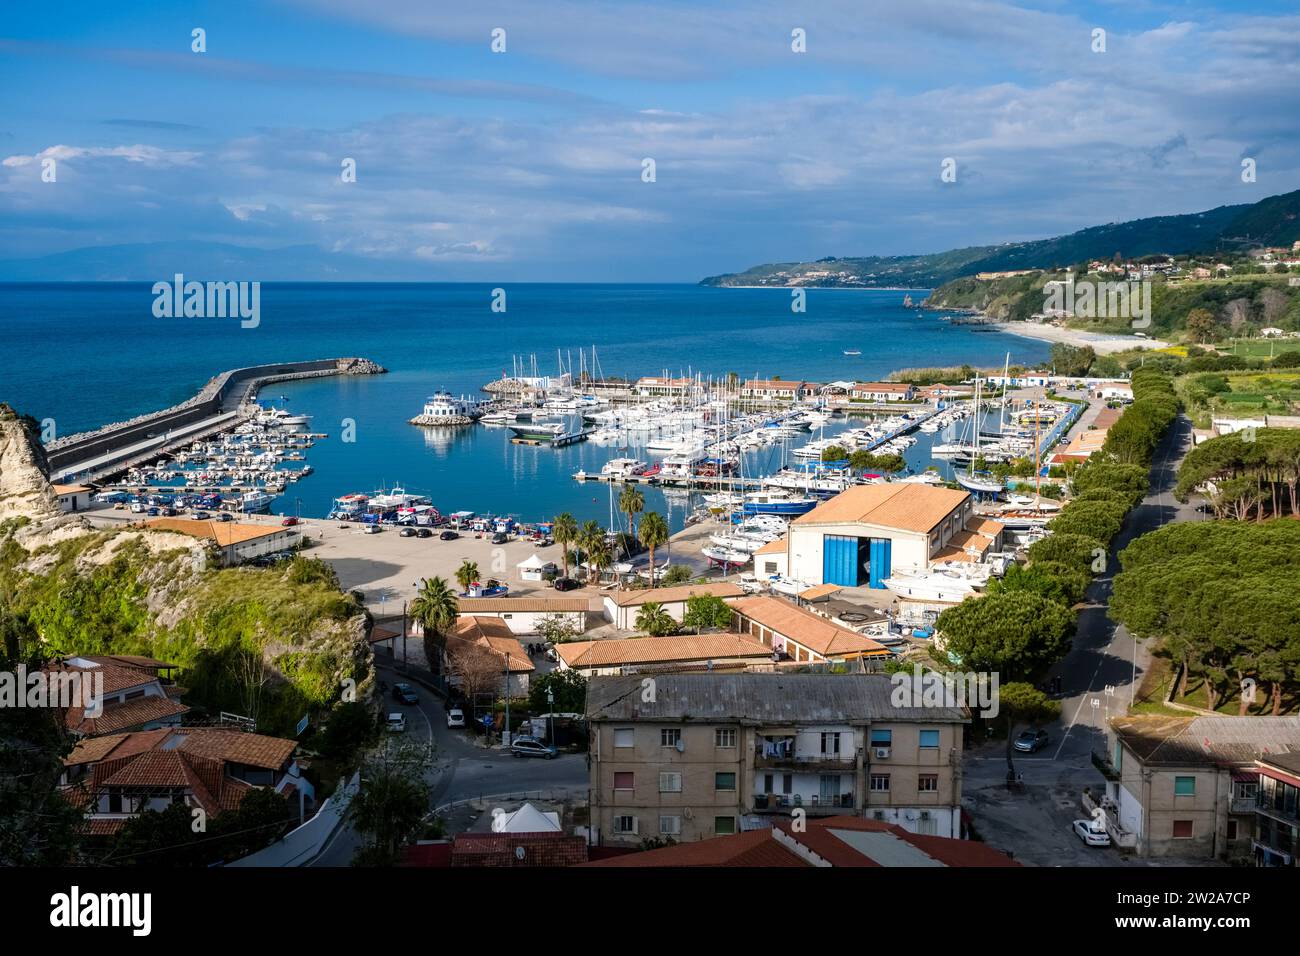 Aerial view of the harbour and marina of Tropea, with many boats at anchor. Stock Photo